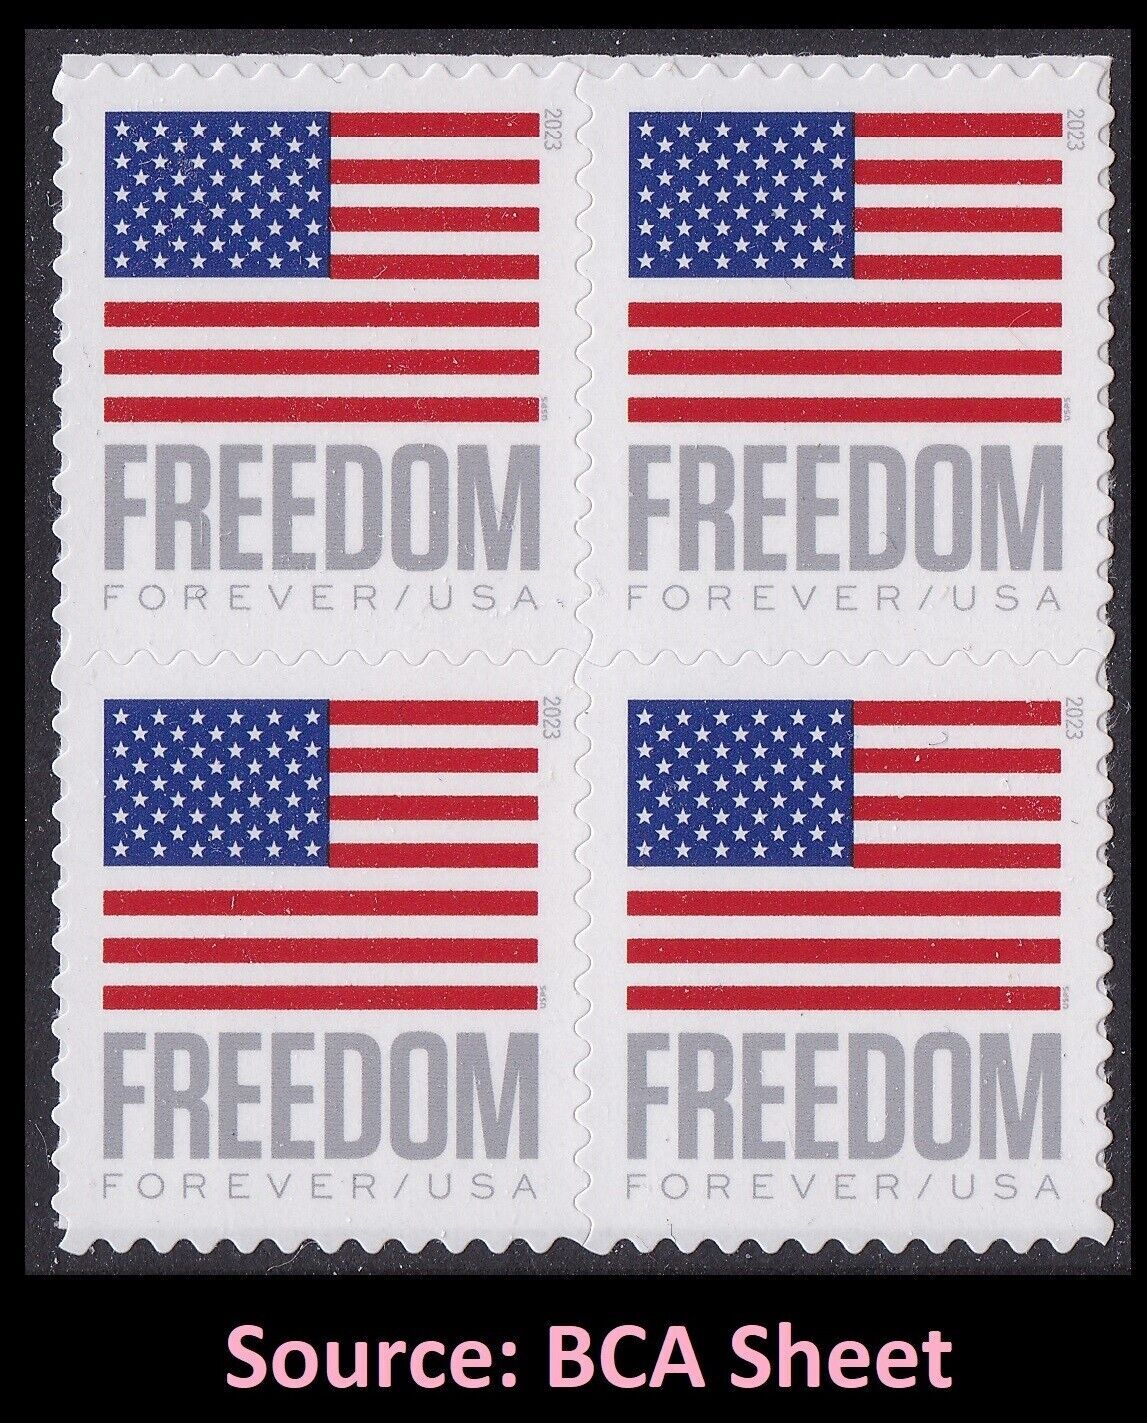 NEW 2022 US FLAGS (2) DS BOOKLETS APU P1111/BCA B1111 20 FOREVER STAMPS  MNH